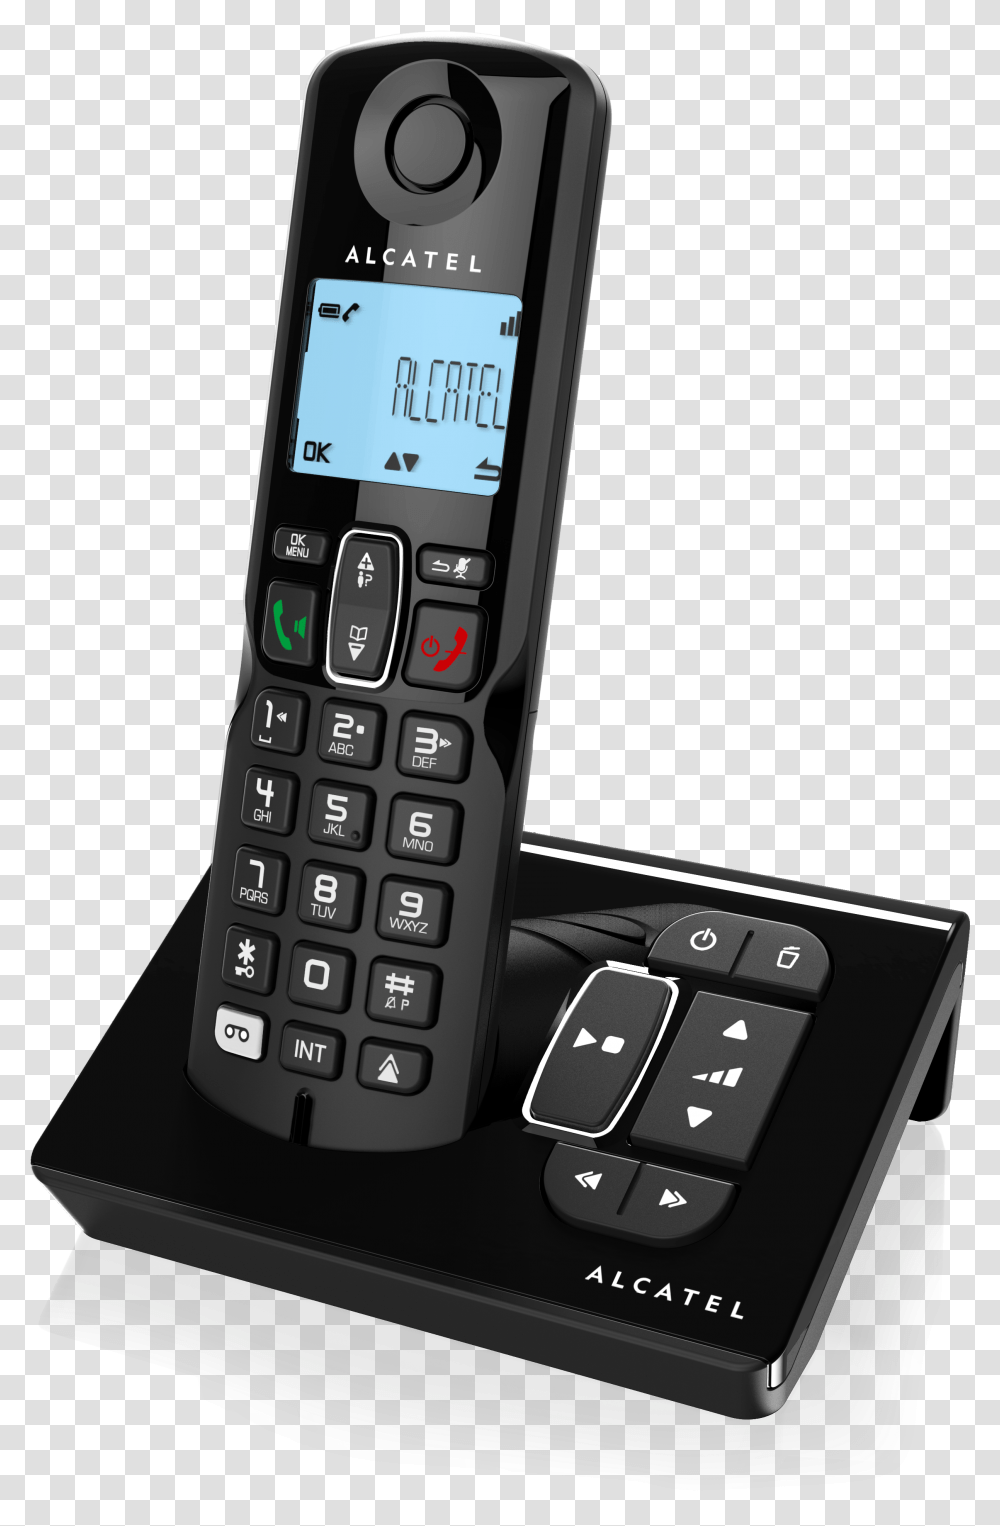 Alcatel S And Voice Alcatel Mobile, Mobile Phone, Electronics, Cell Phone, Computer Keyboard Transparent Png